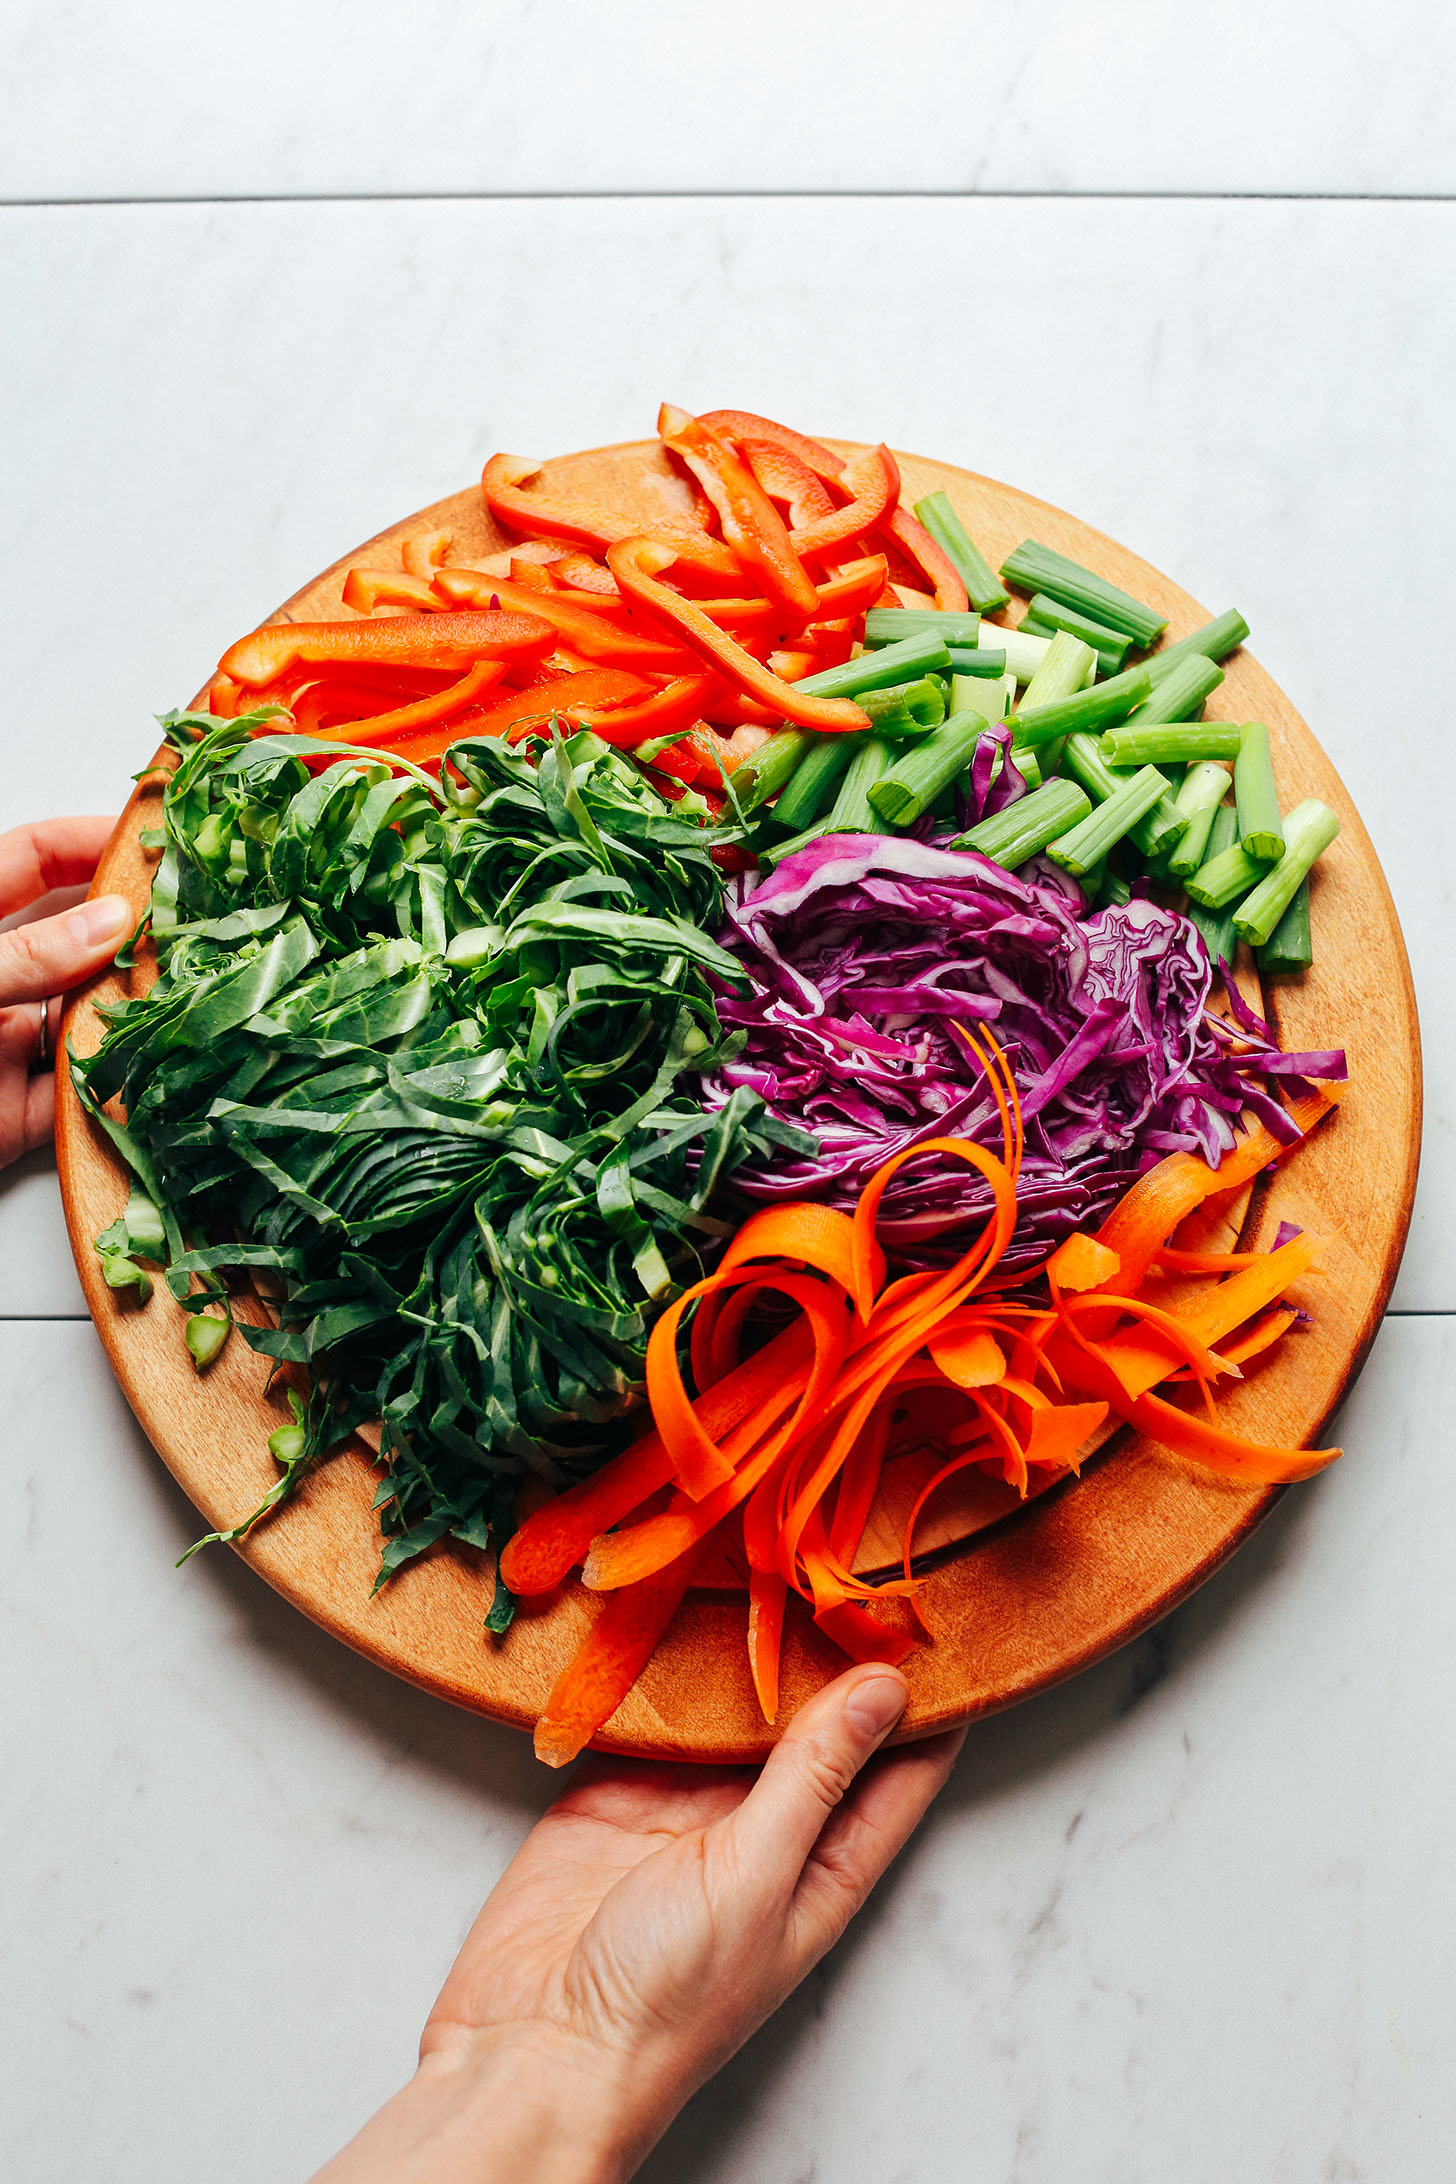 Wood cutting board with red bell pepper, collard greens, red cabbage, green onions, and carrots for making Noodle-Free Pad Thai